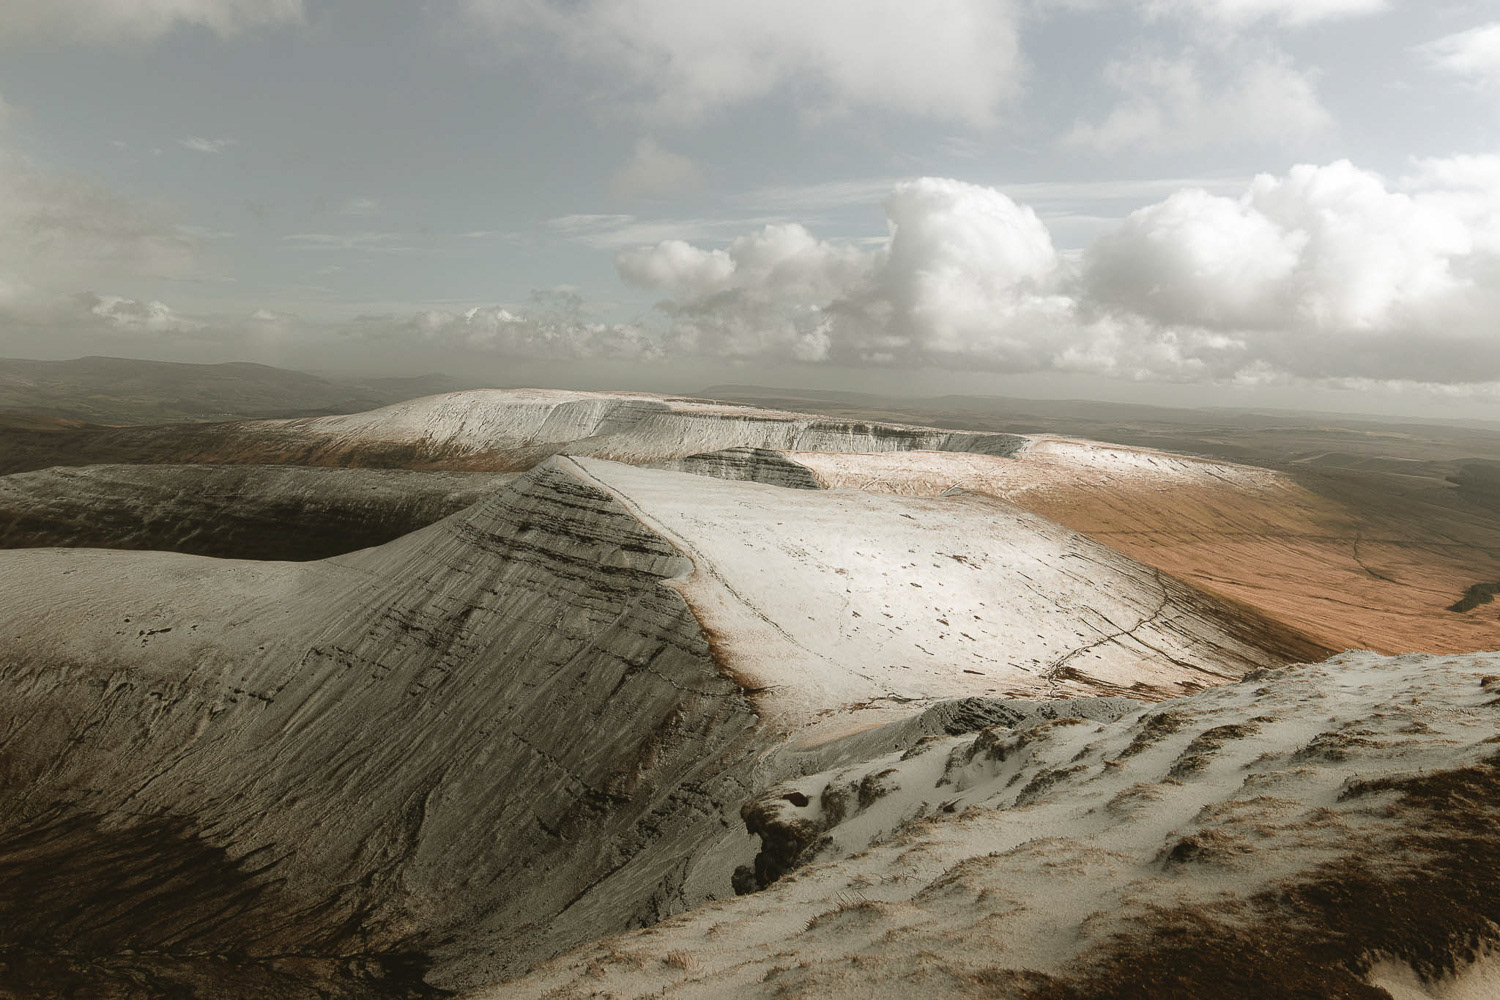 Snow covers landscape in the Brecon Beacons